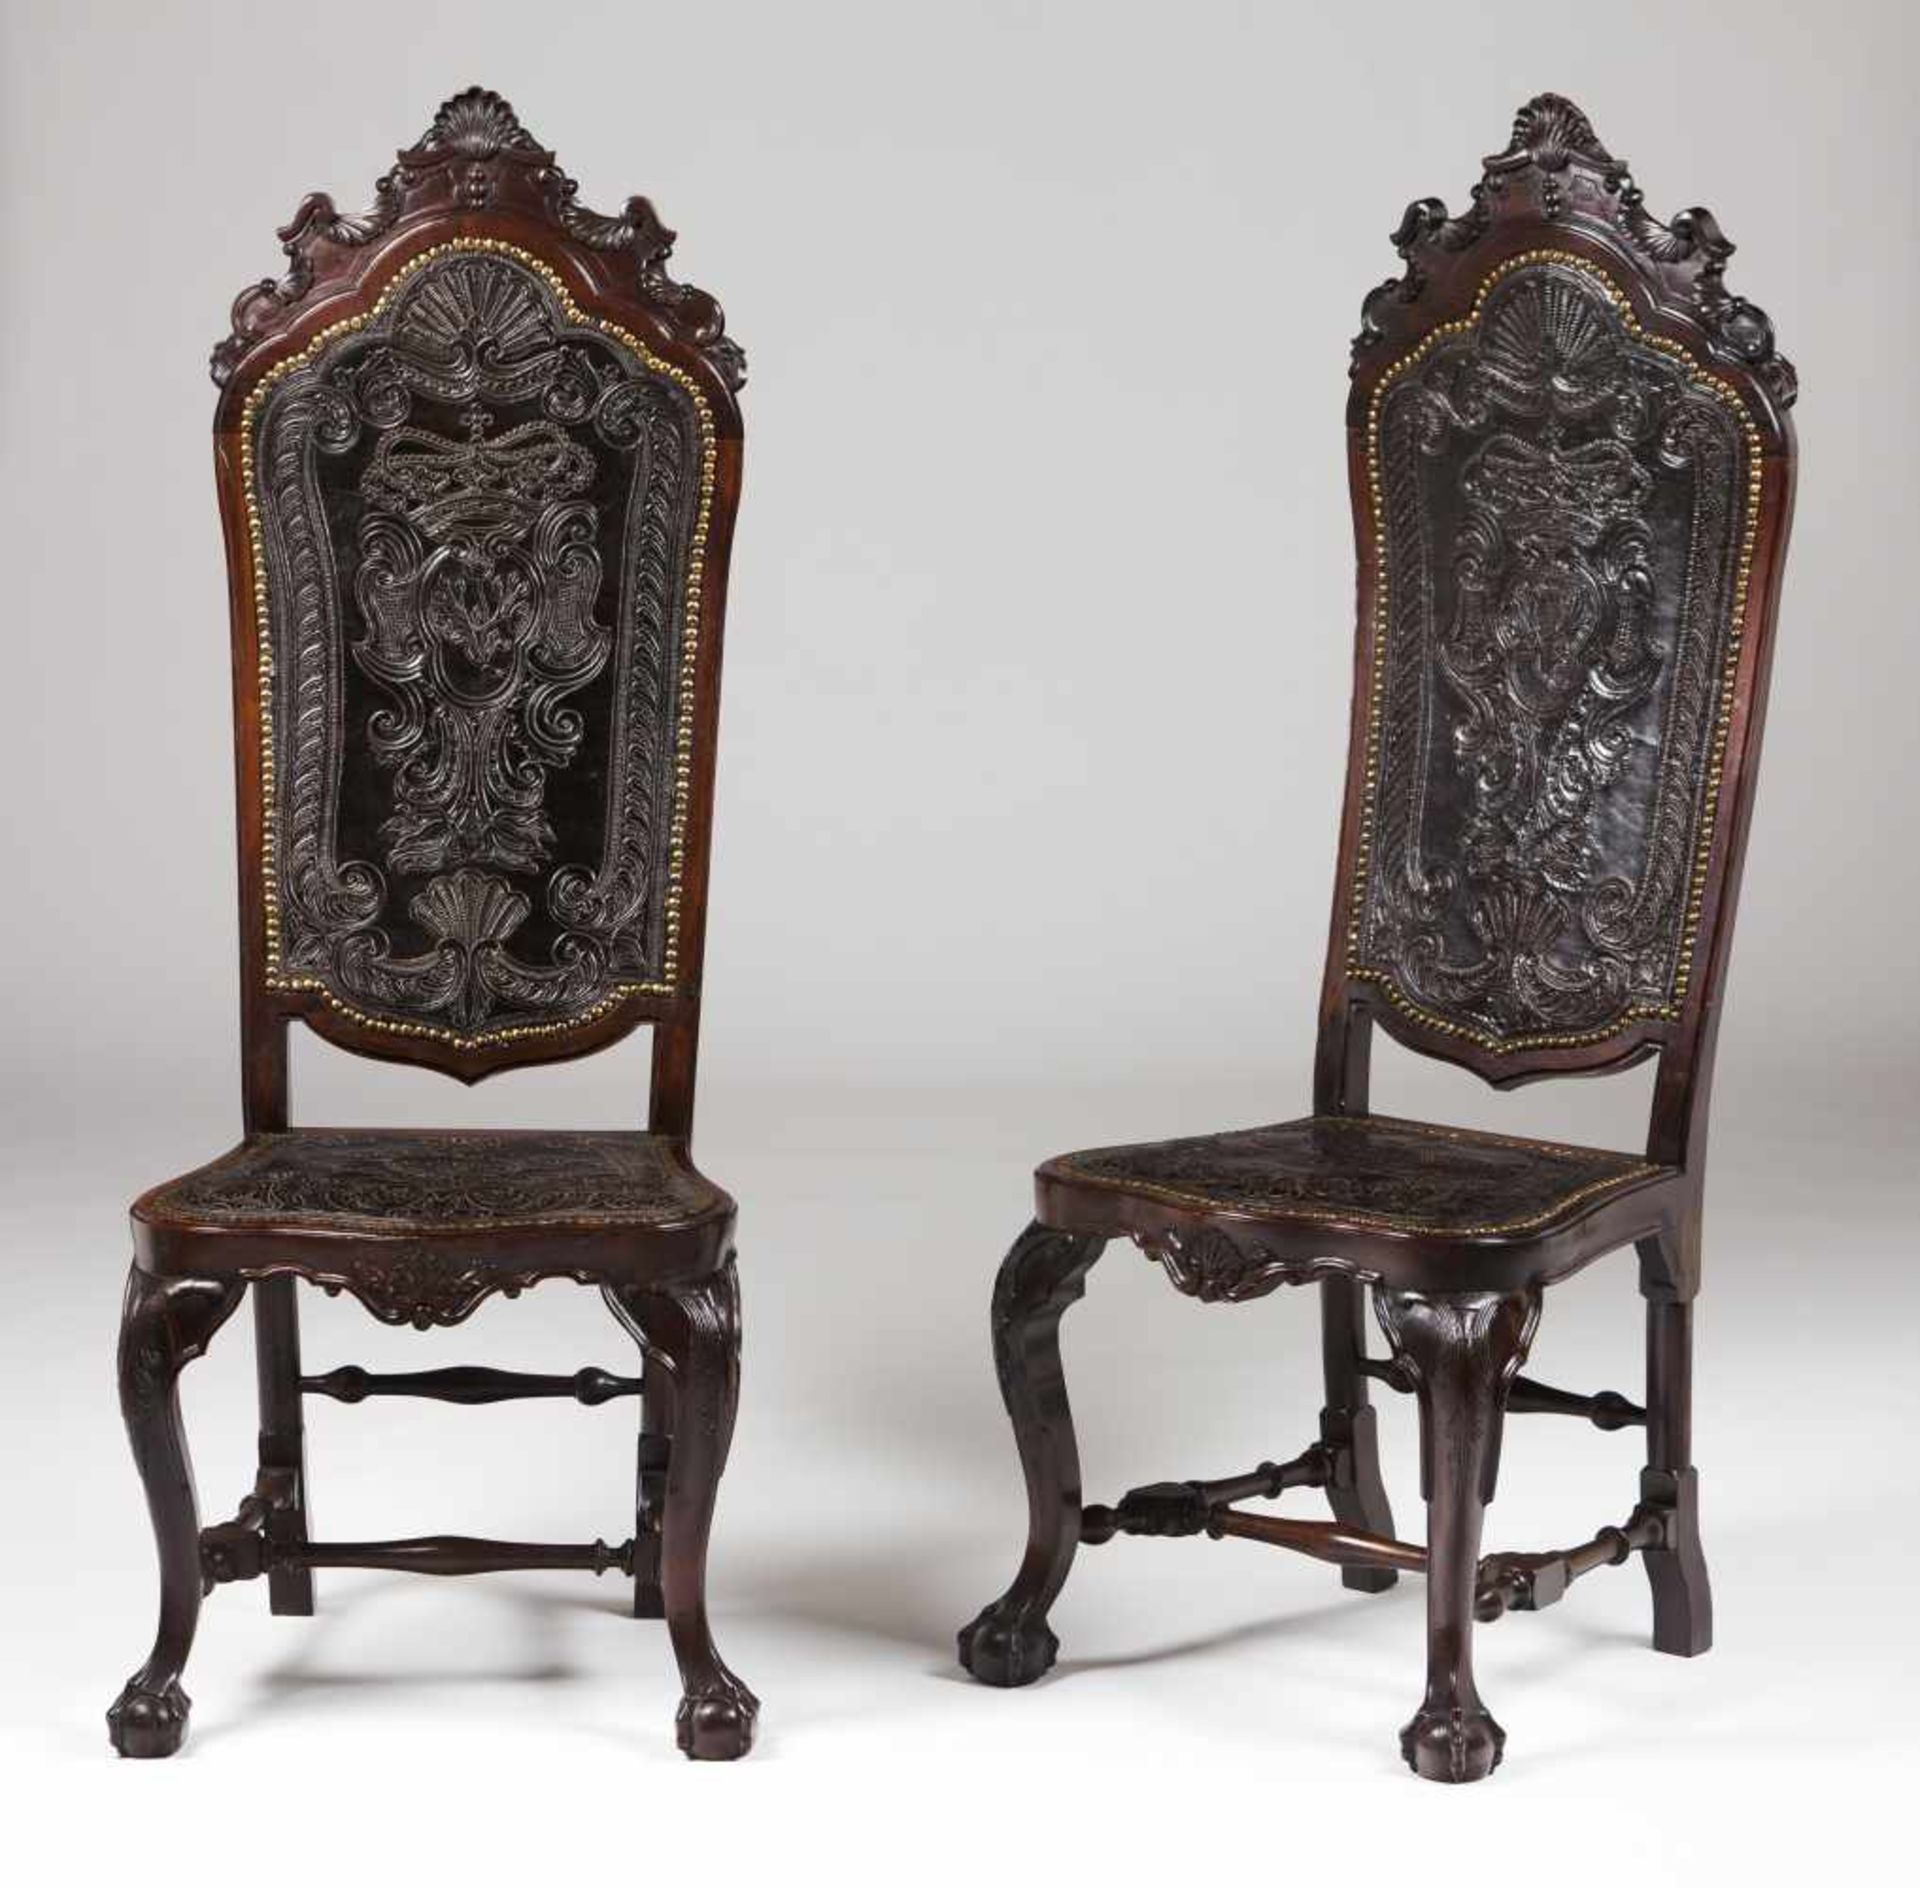 A pair of tall D.José style chairsRosewoodPart carved with shell decorative motifsClaw